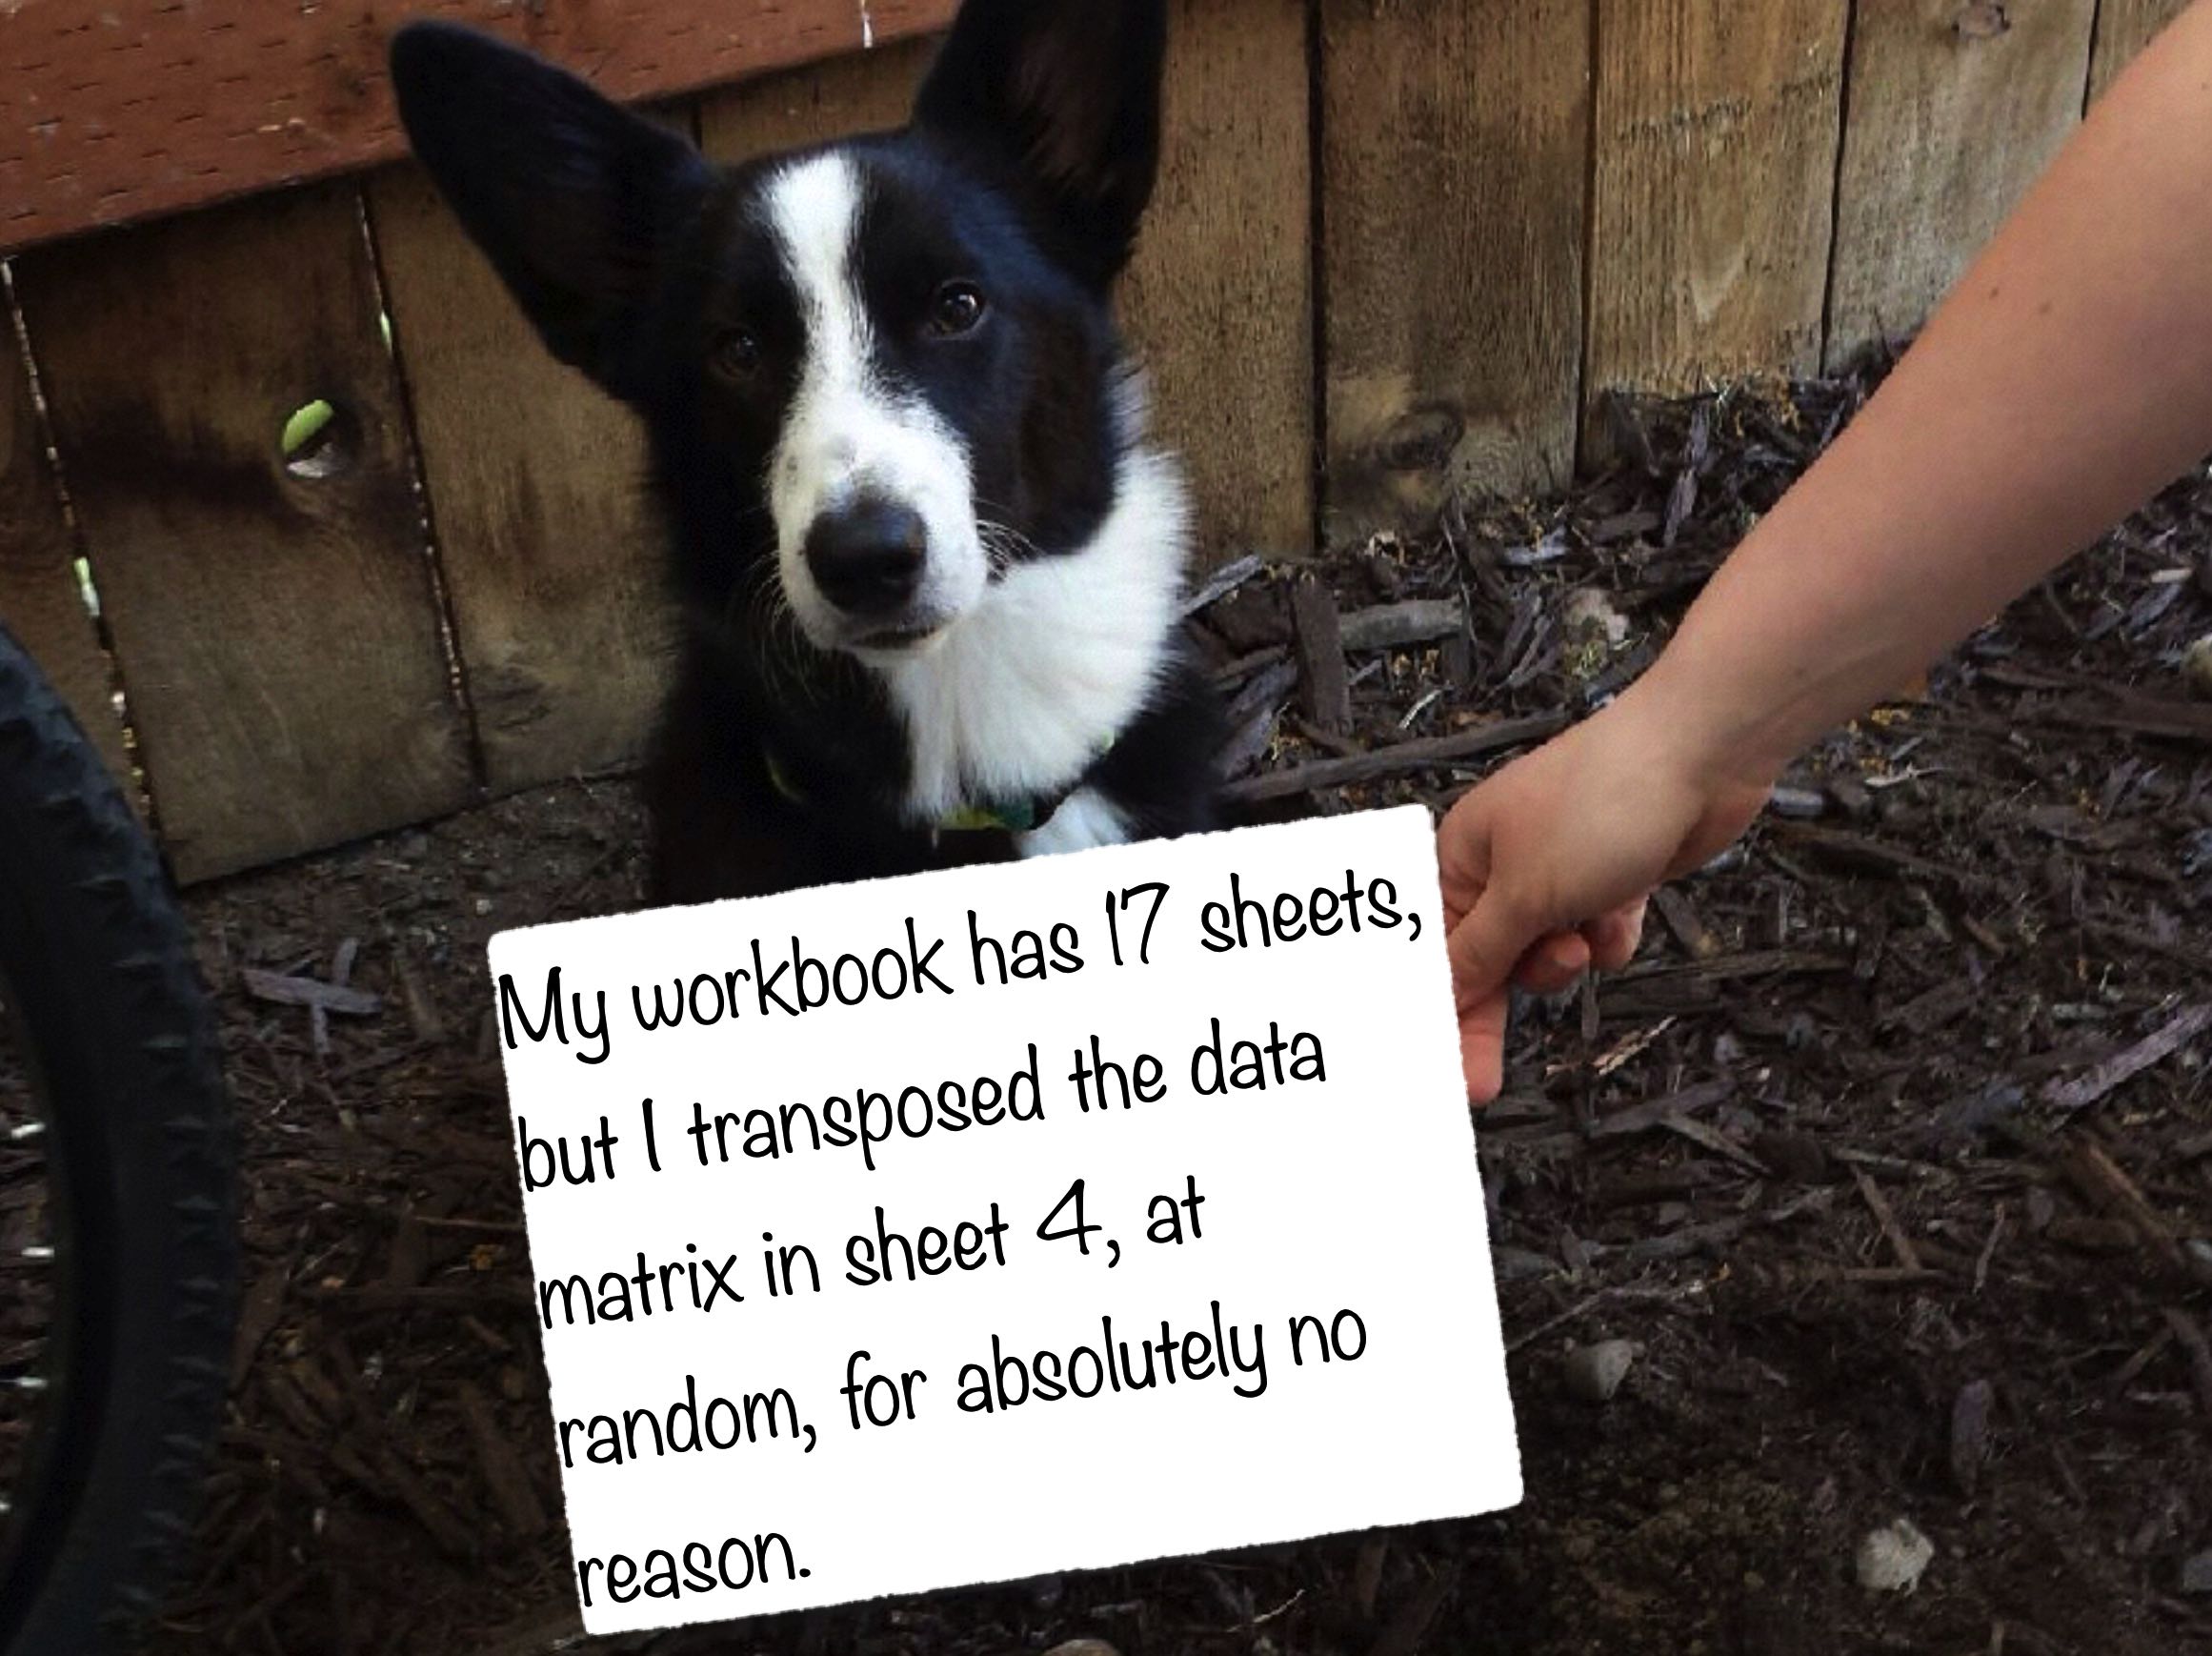 a dog with a sign saying they
transposed sheet 4 in their workbook for no reason